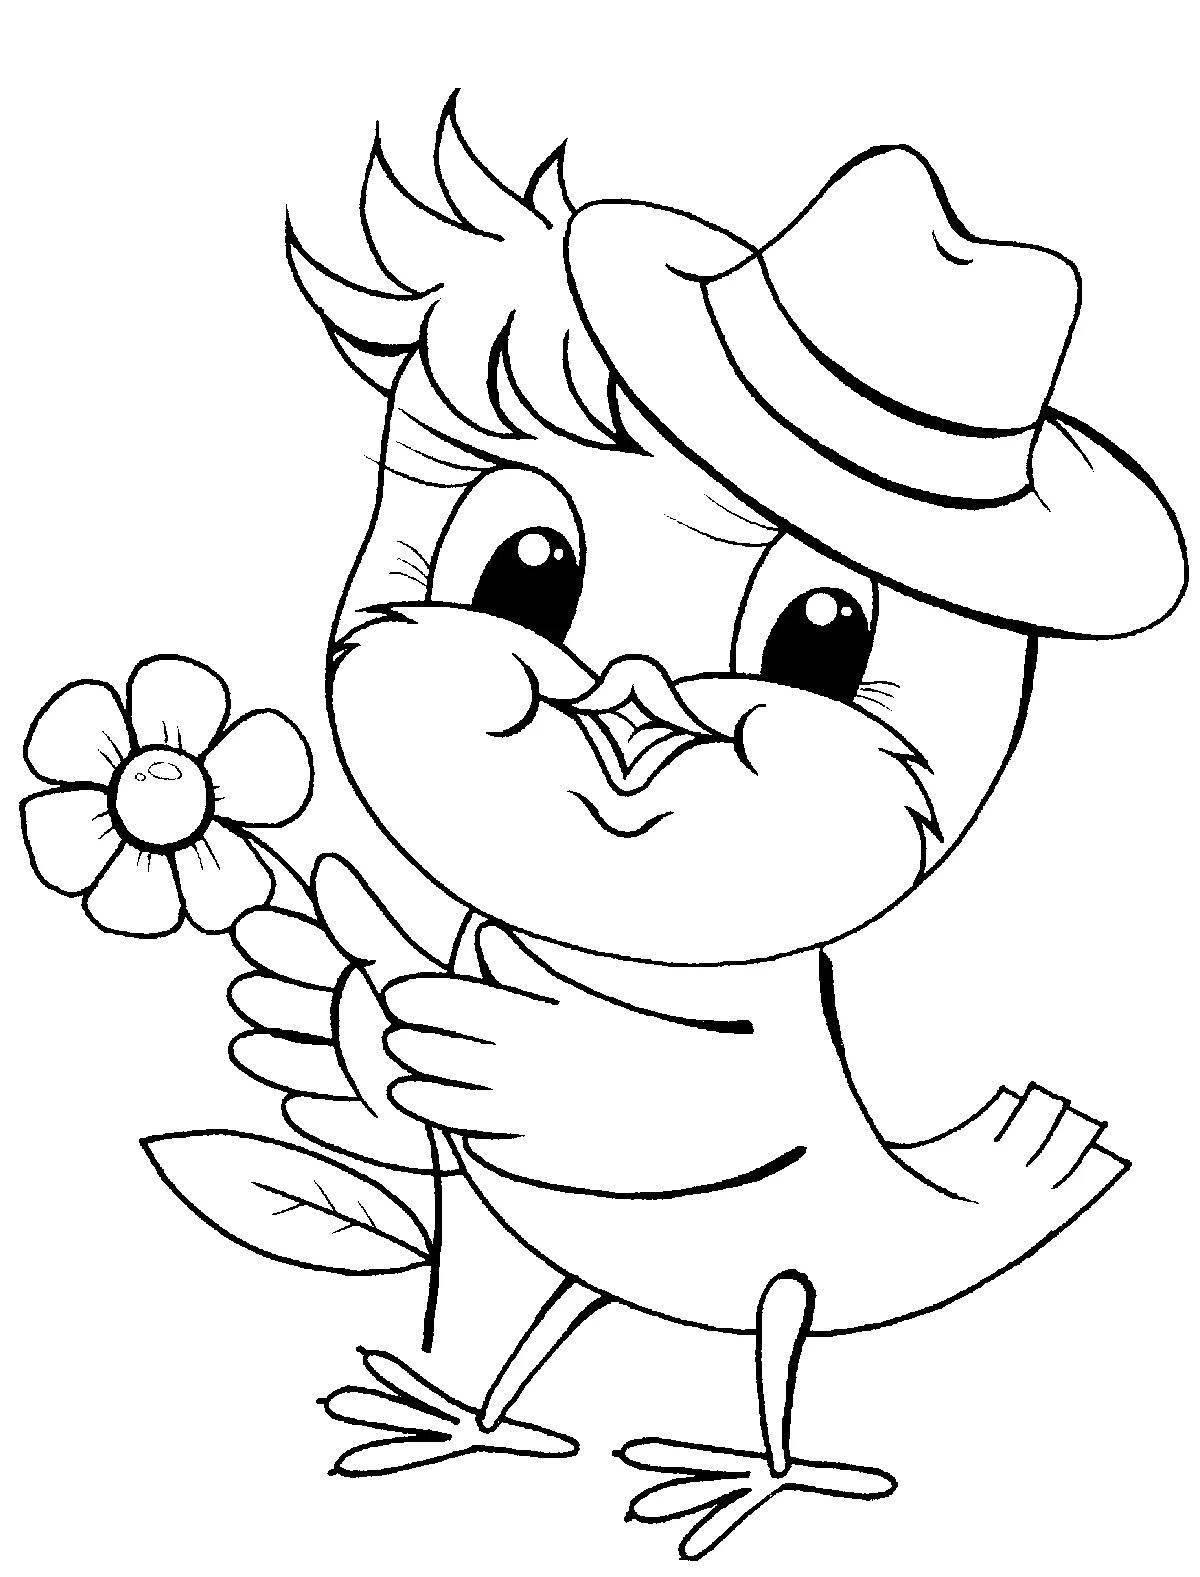 Coloring cute sparrow for kids